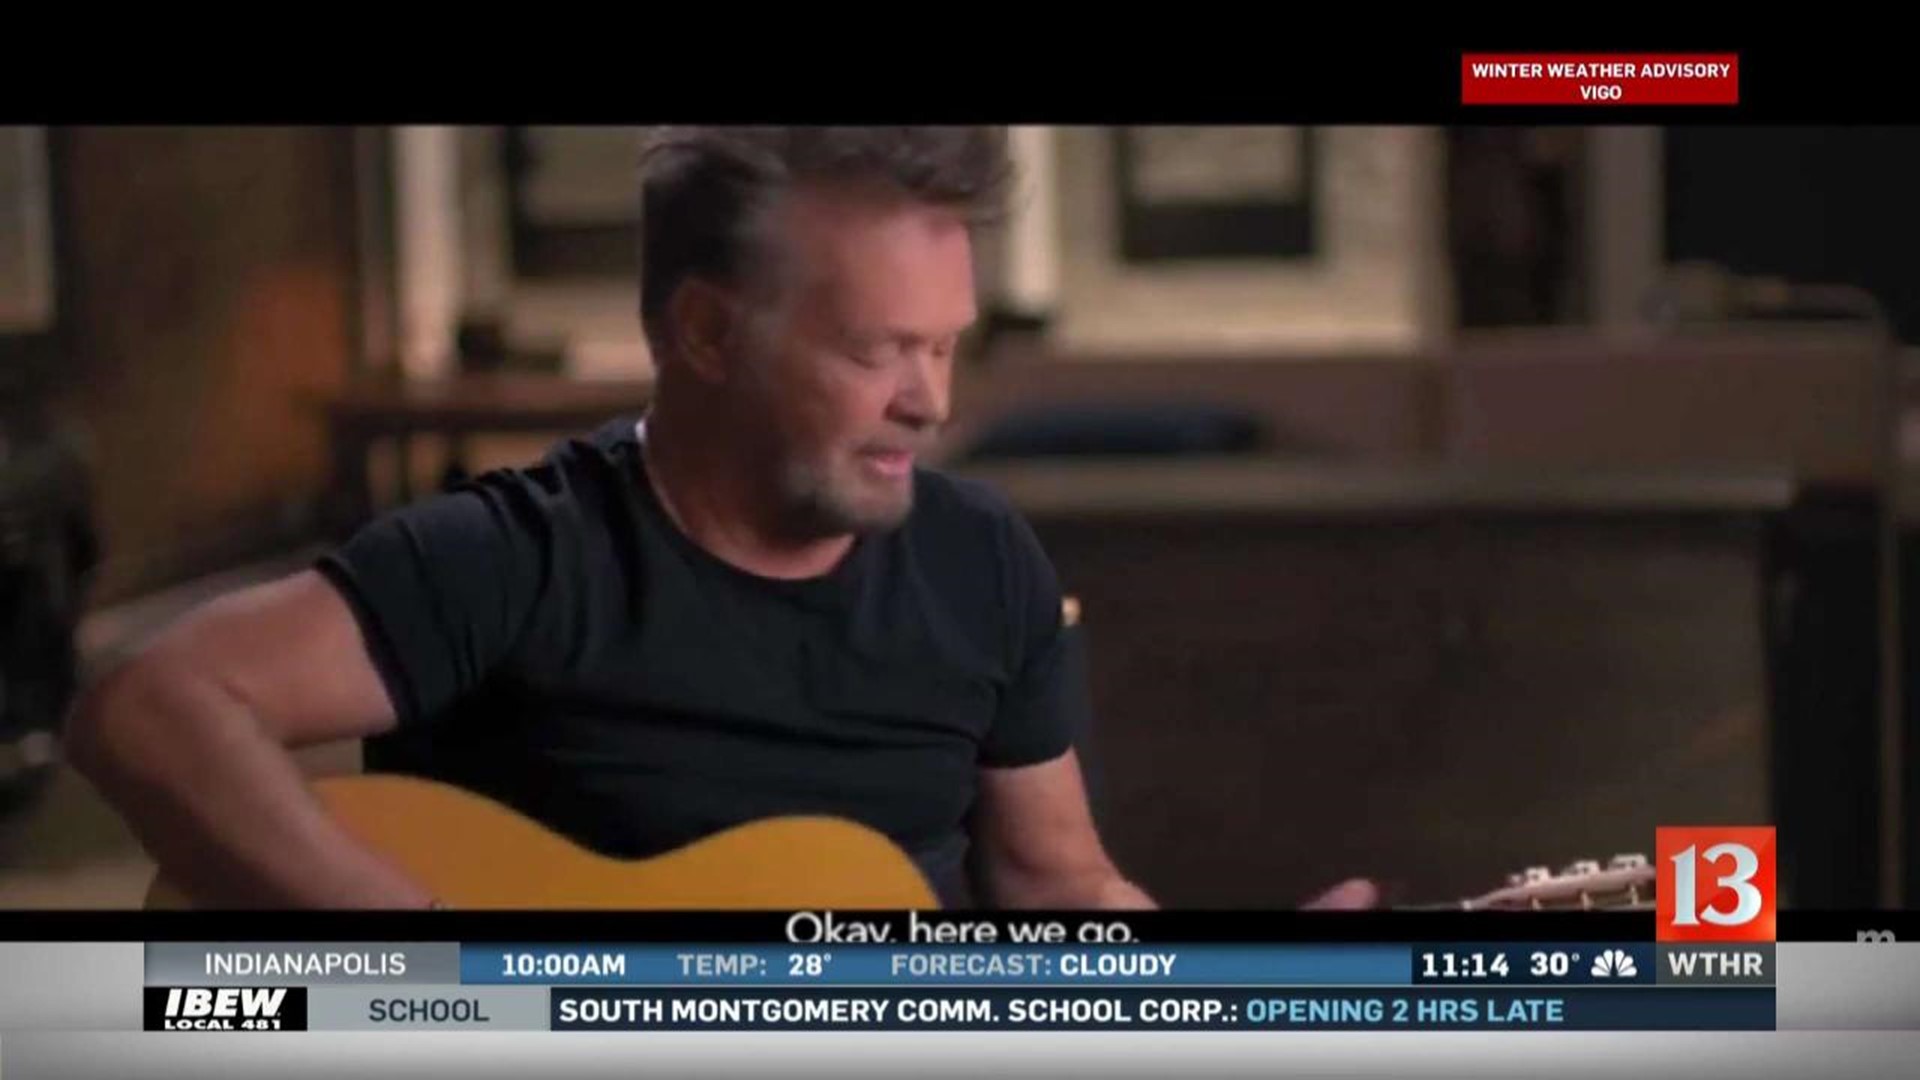 Mellencamp does ad for Bloomberg